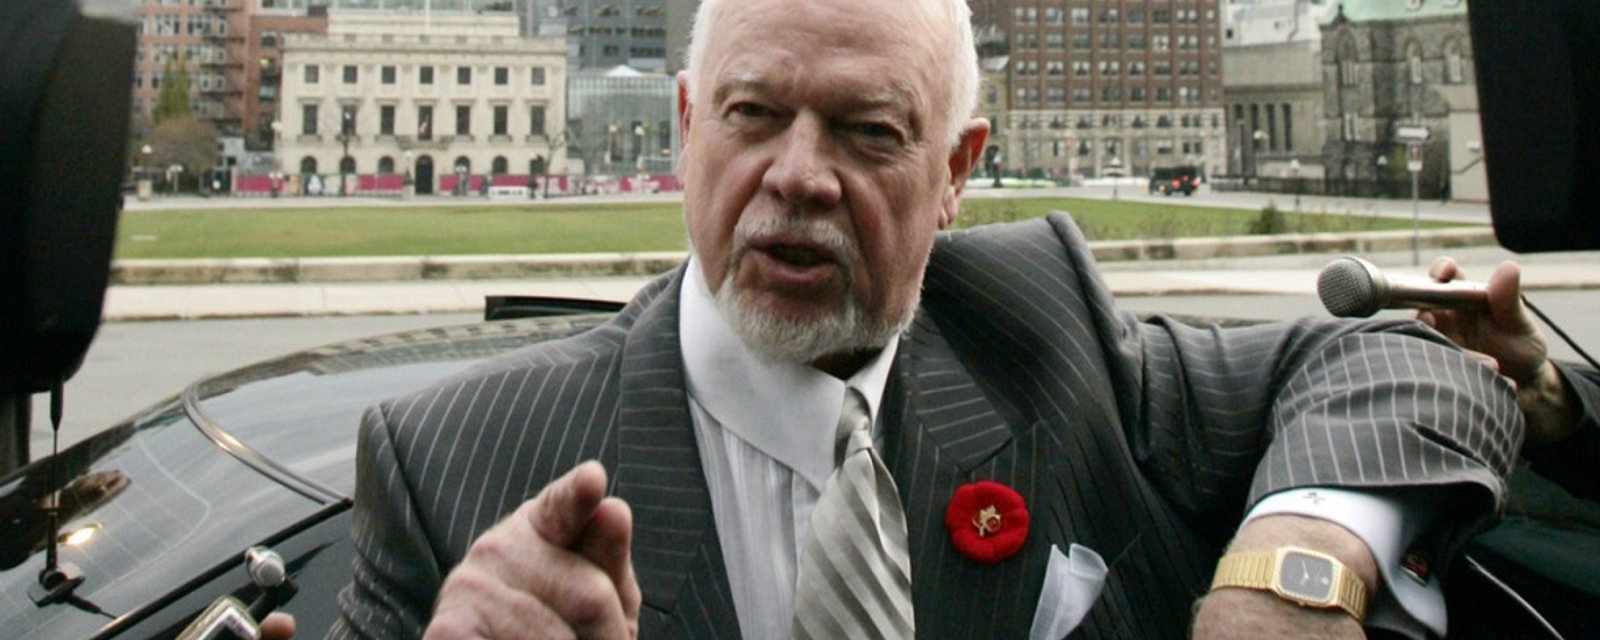 Don Cherry shares his thoughts on Toronto's goaltending controversy.